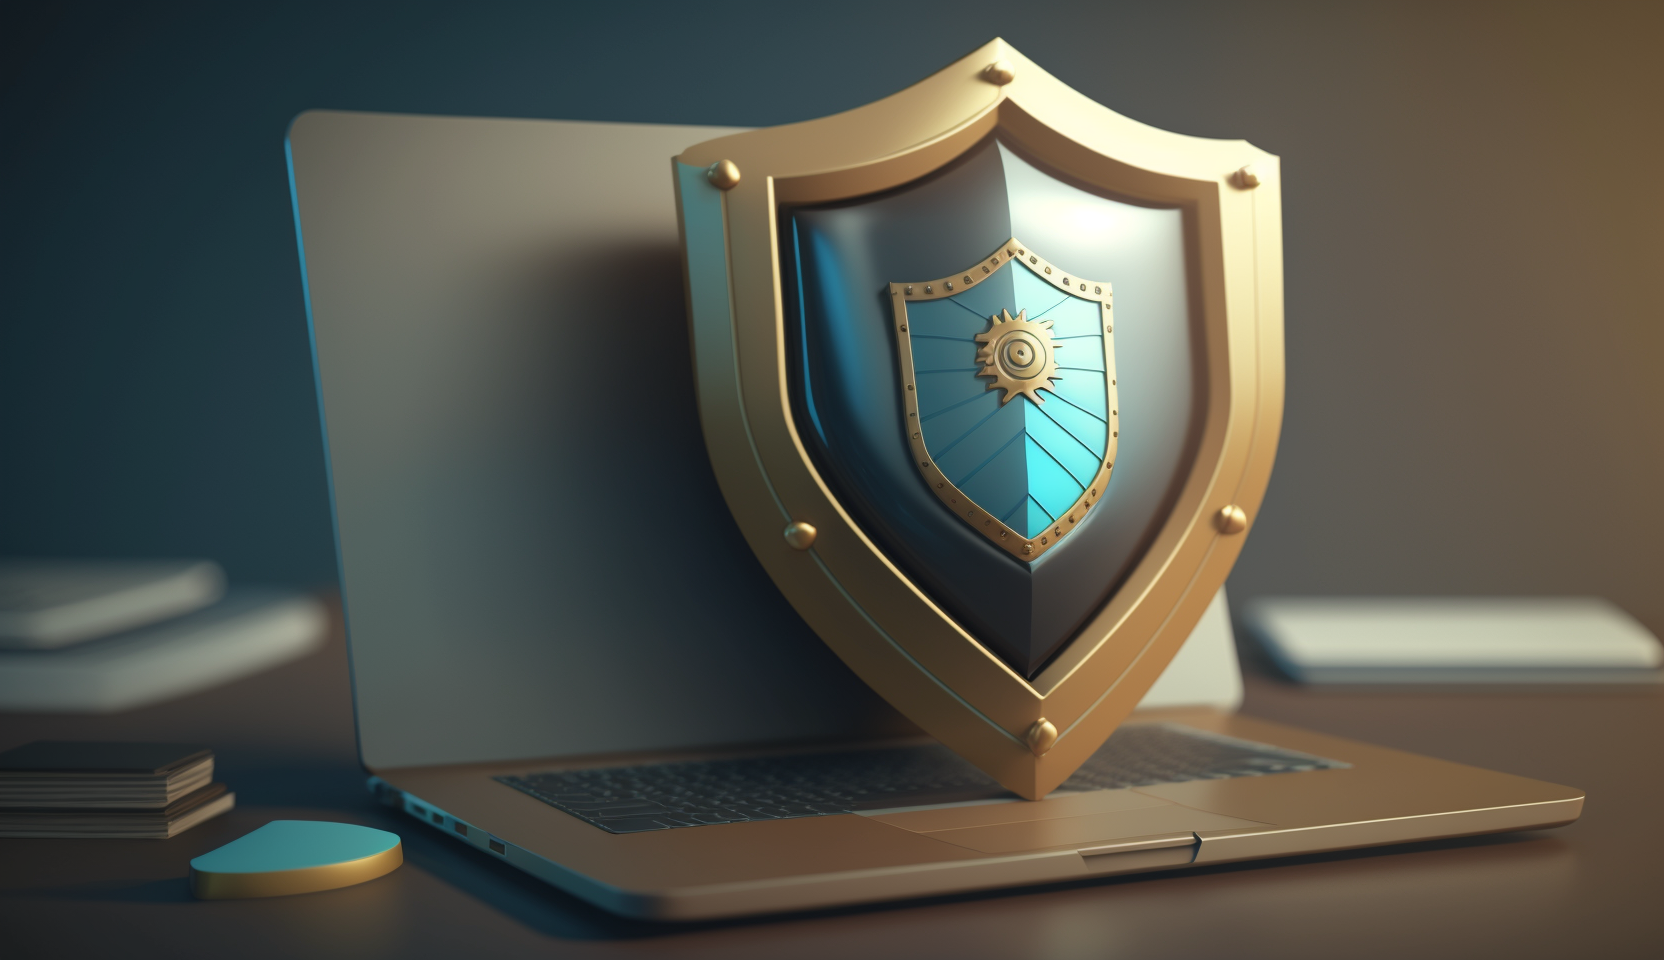 A 3D animated image featuring a shield protecting a laptop displaying a graduation cap, symbolizing the protection of student data in the education industry.